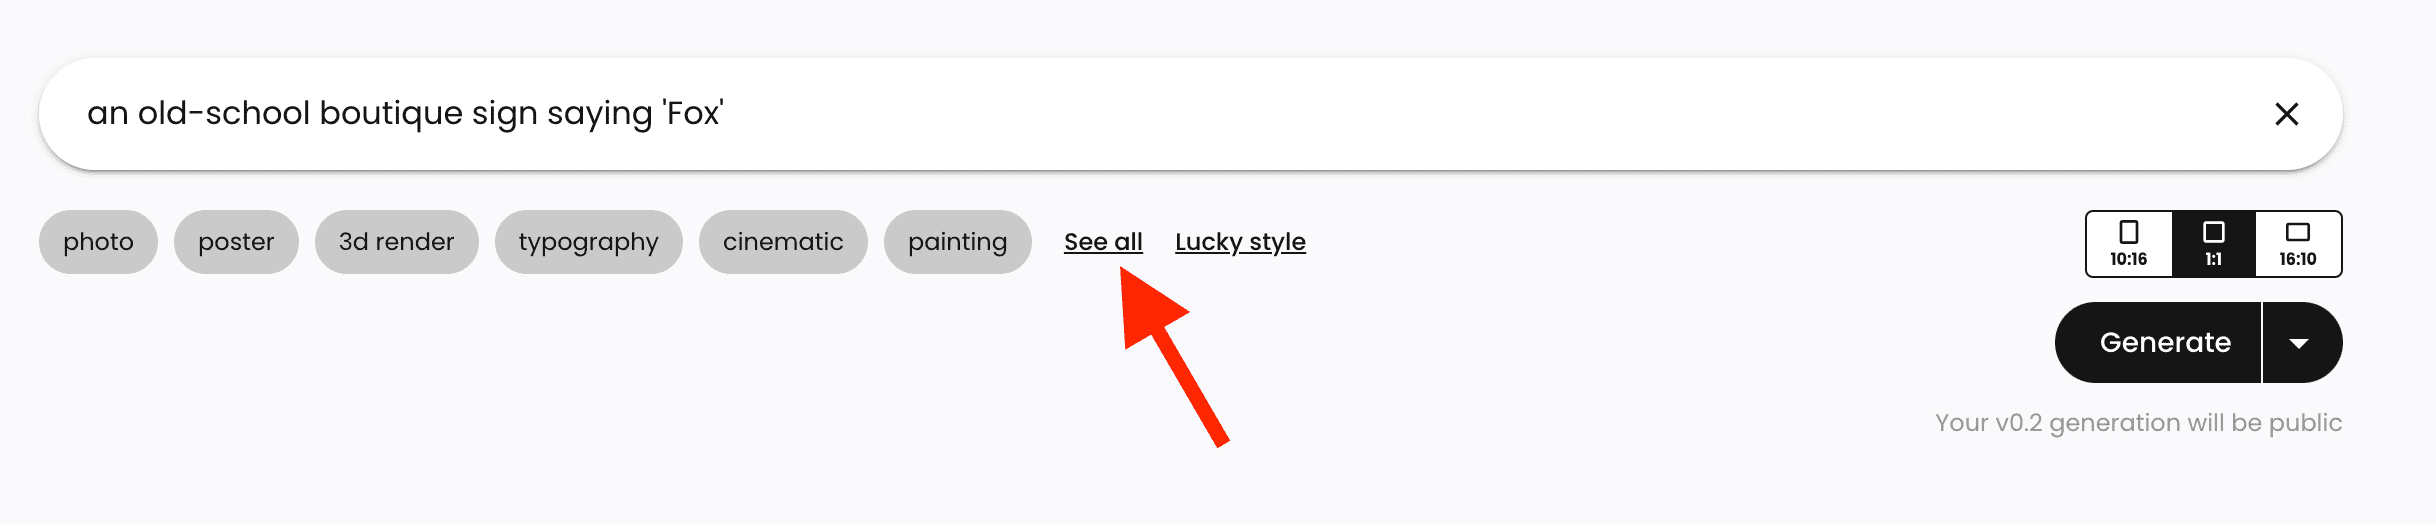 Click on the ‘See all’ button to expand the list and see all styles.